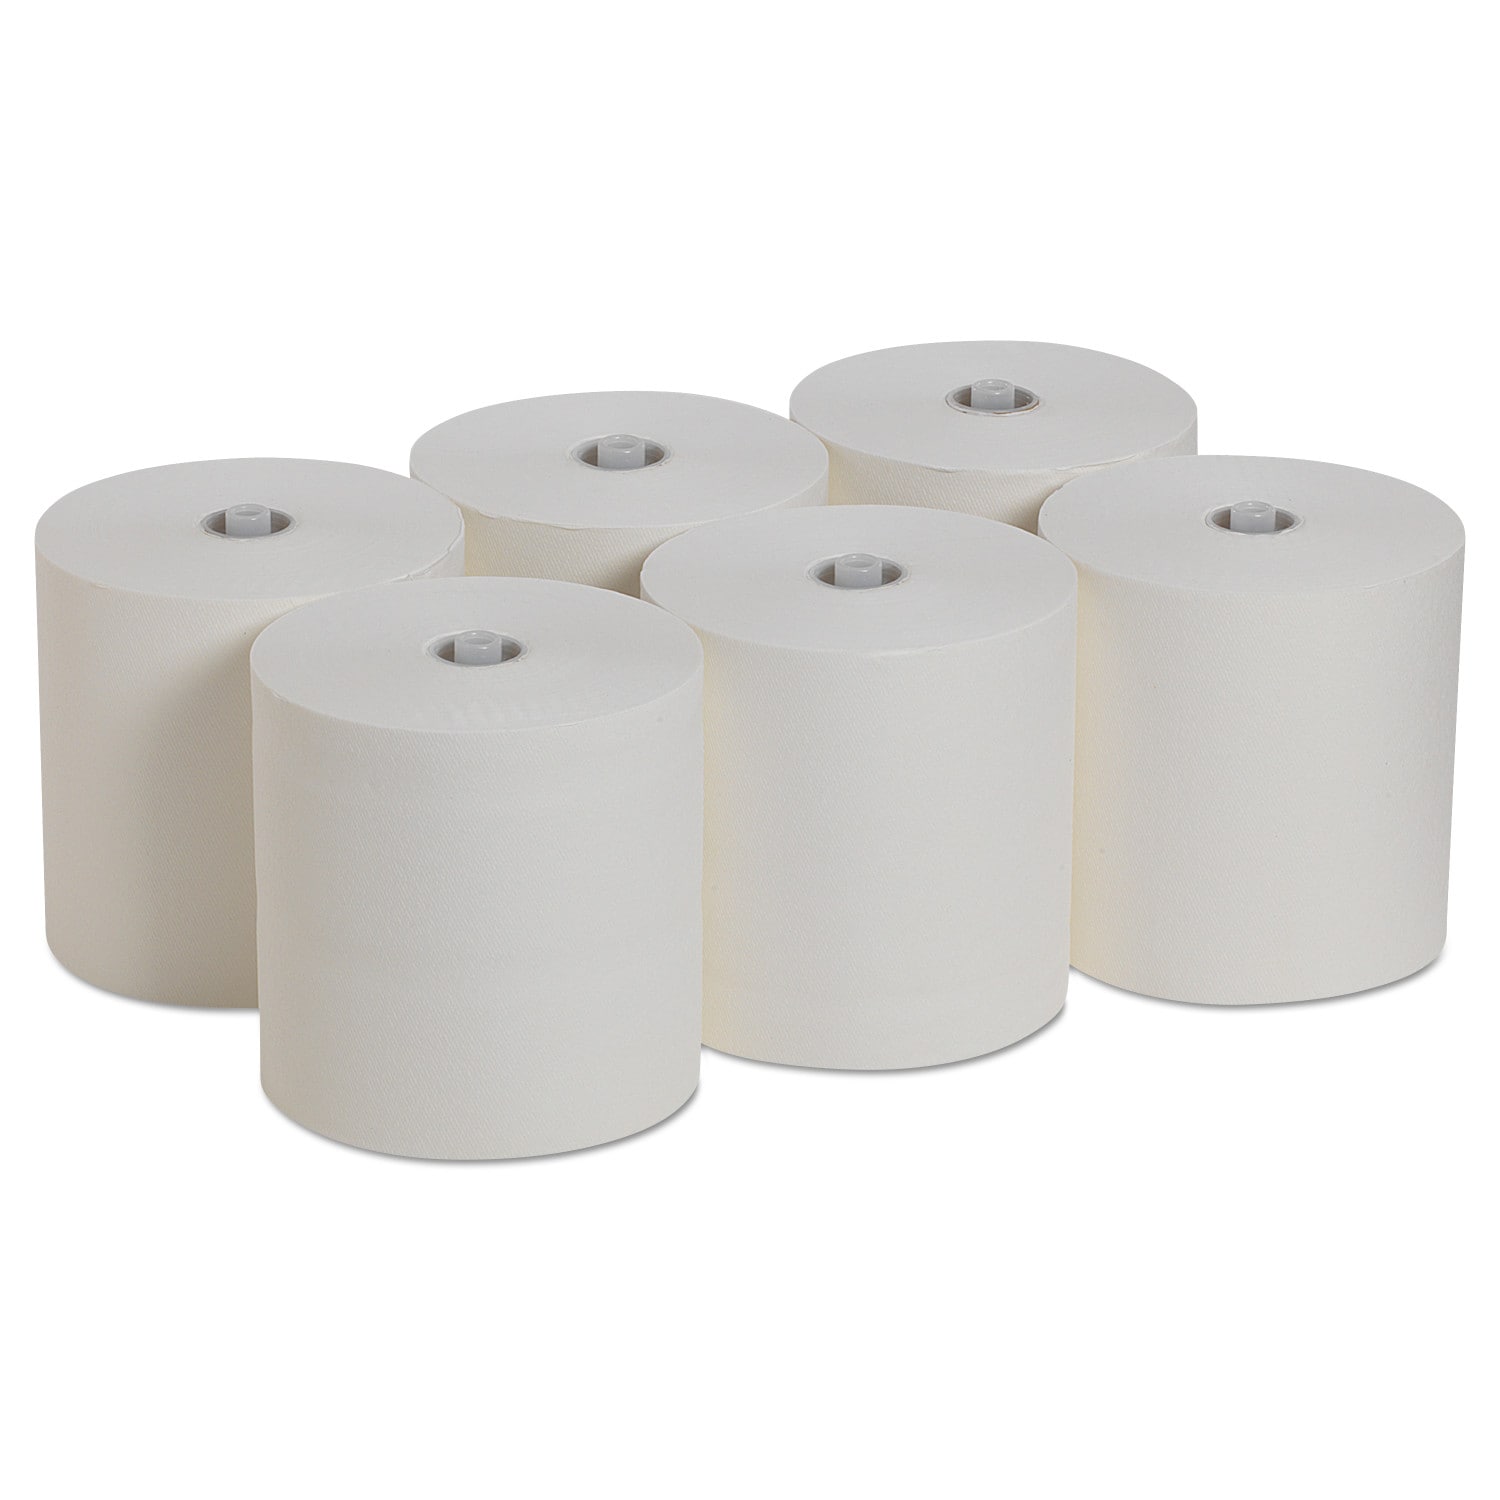 Georgia-Pacific Commercial Eco-Friendly Paper Towels - Pacific Blue Ultra,  White, 7.87 x 1150 ft, 6 Roll/Carton - High-Capacity & Affordable Quality  in the Paper Towels department at